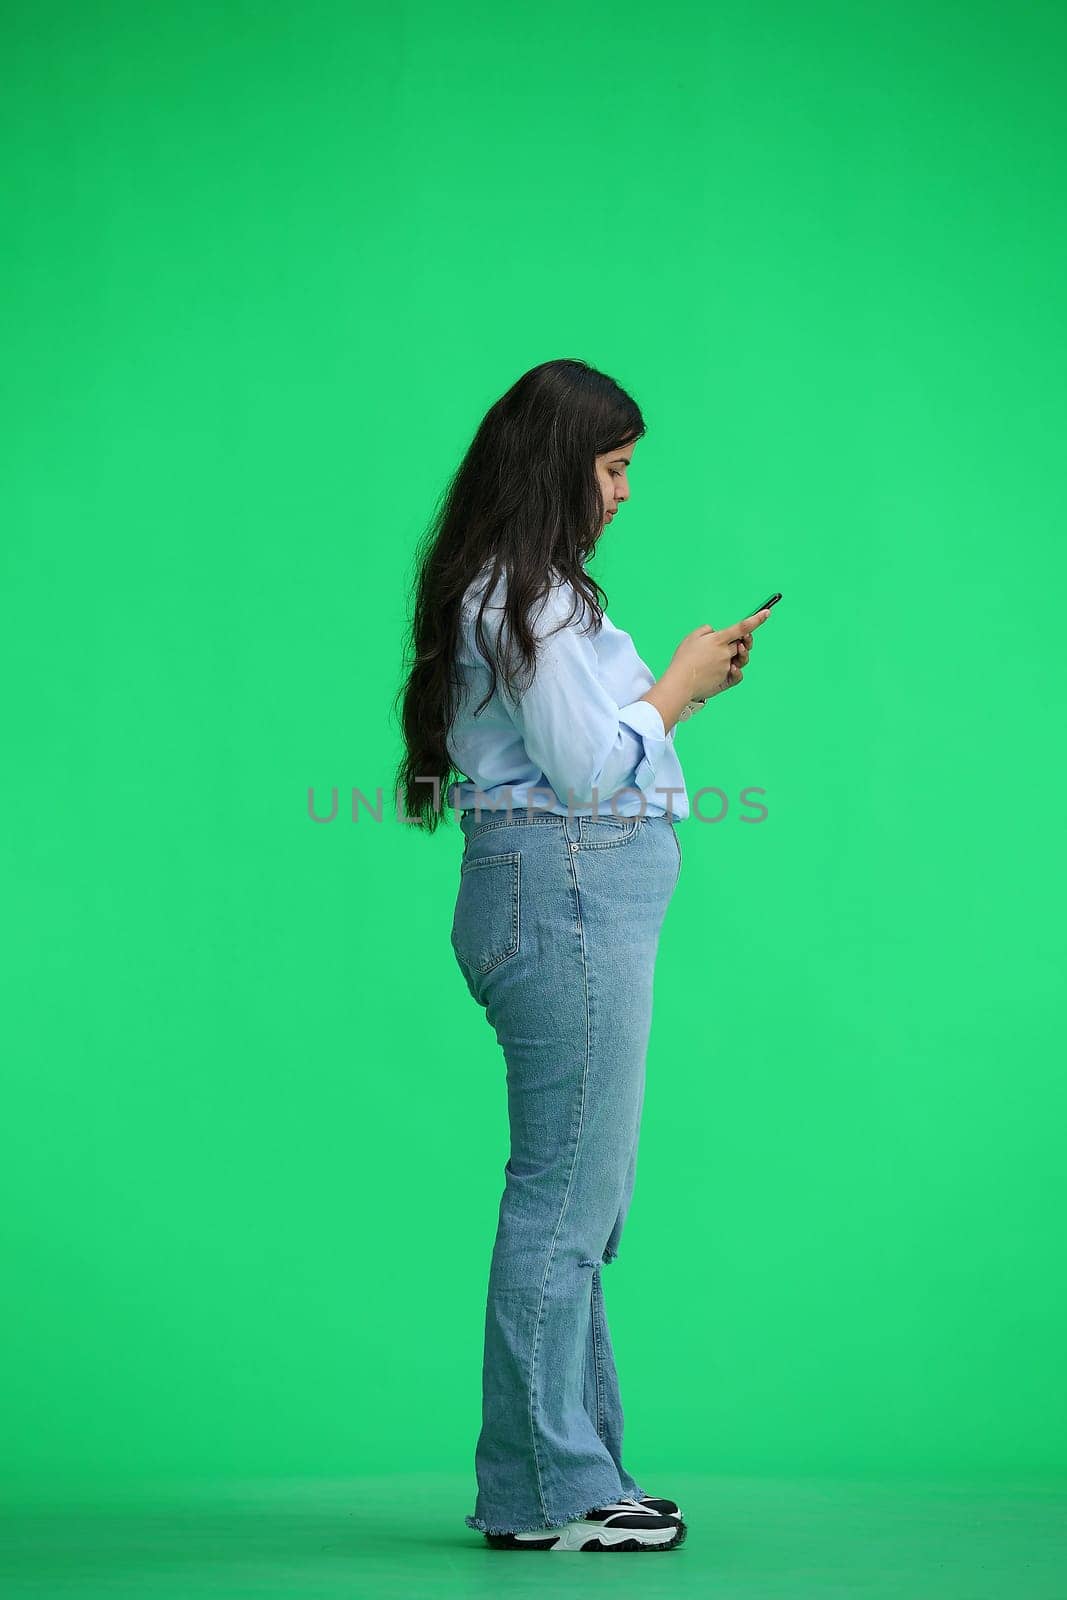 A girl in a blue shirt, on a green background, full-length, with a phone in her hands, in profile.